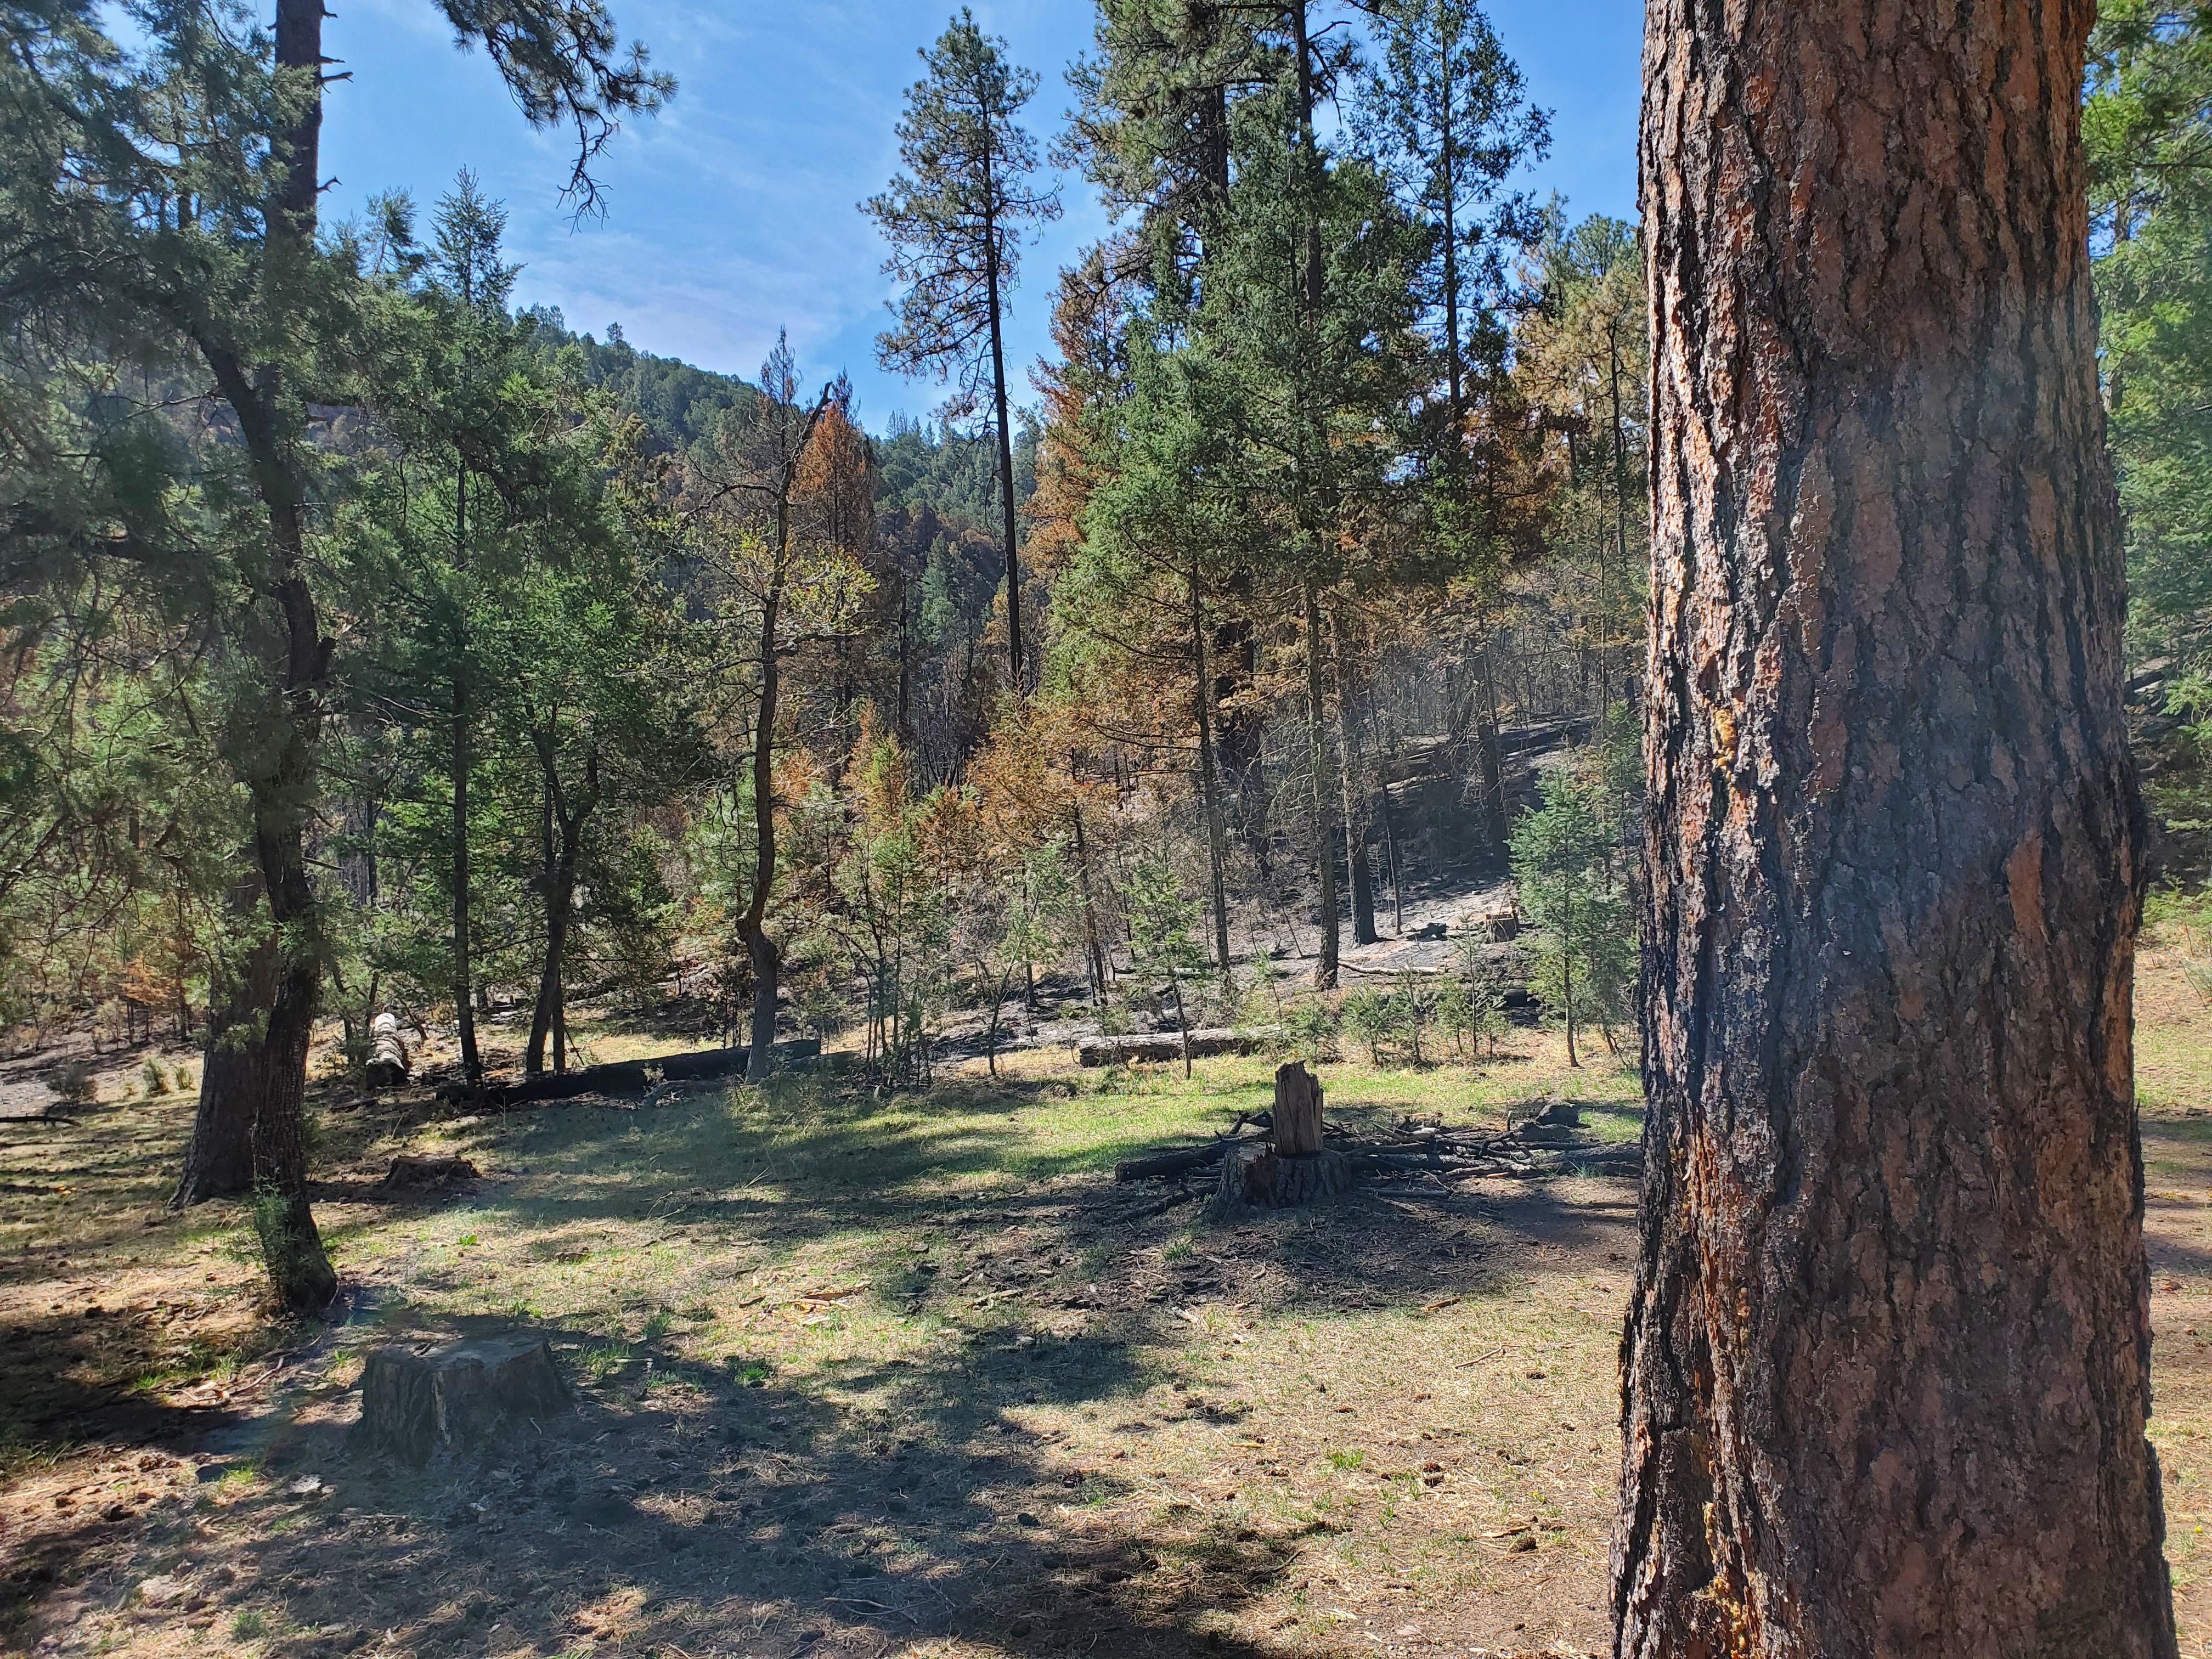 This dispersed campground was left unburned by the Nogal Canyon Fire.